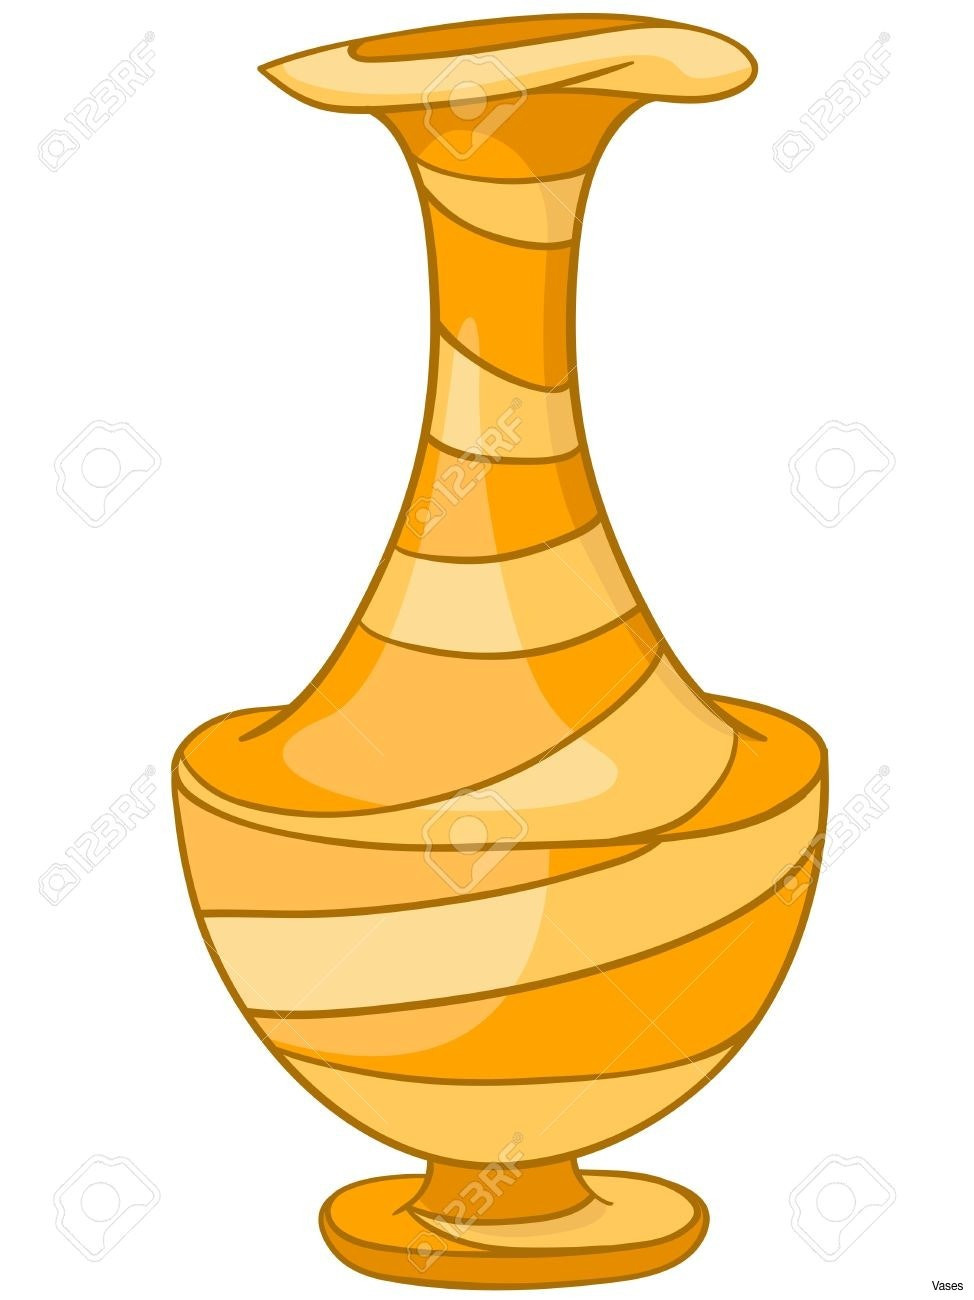 11 Unique Pictures Of Yellow Roses In A Vase 2024 free download pictures of yellow roses in a vase of will clipart colored flower vase clip arth vases art infoi 0d of for for will clipart colored flower vase clip arth vases art infoi 0d of for clipart of